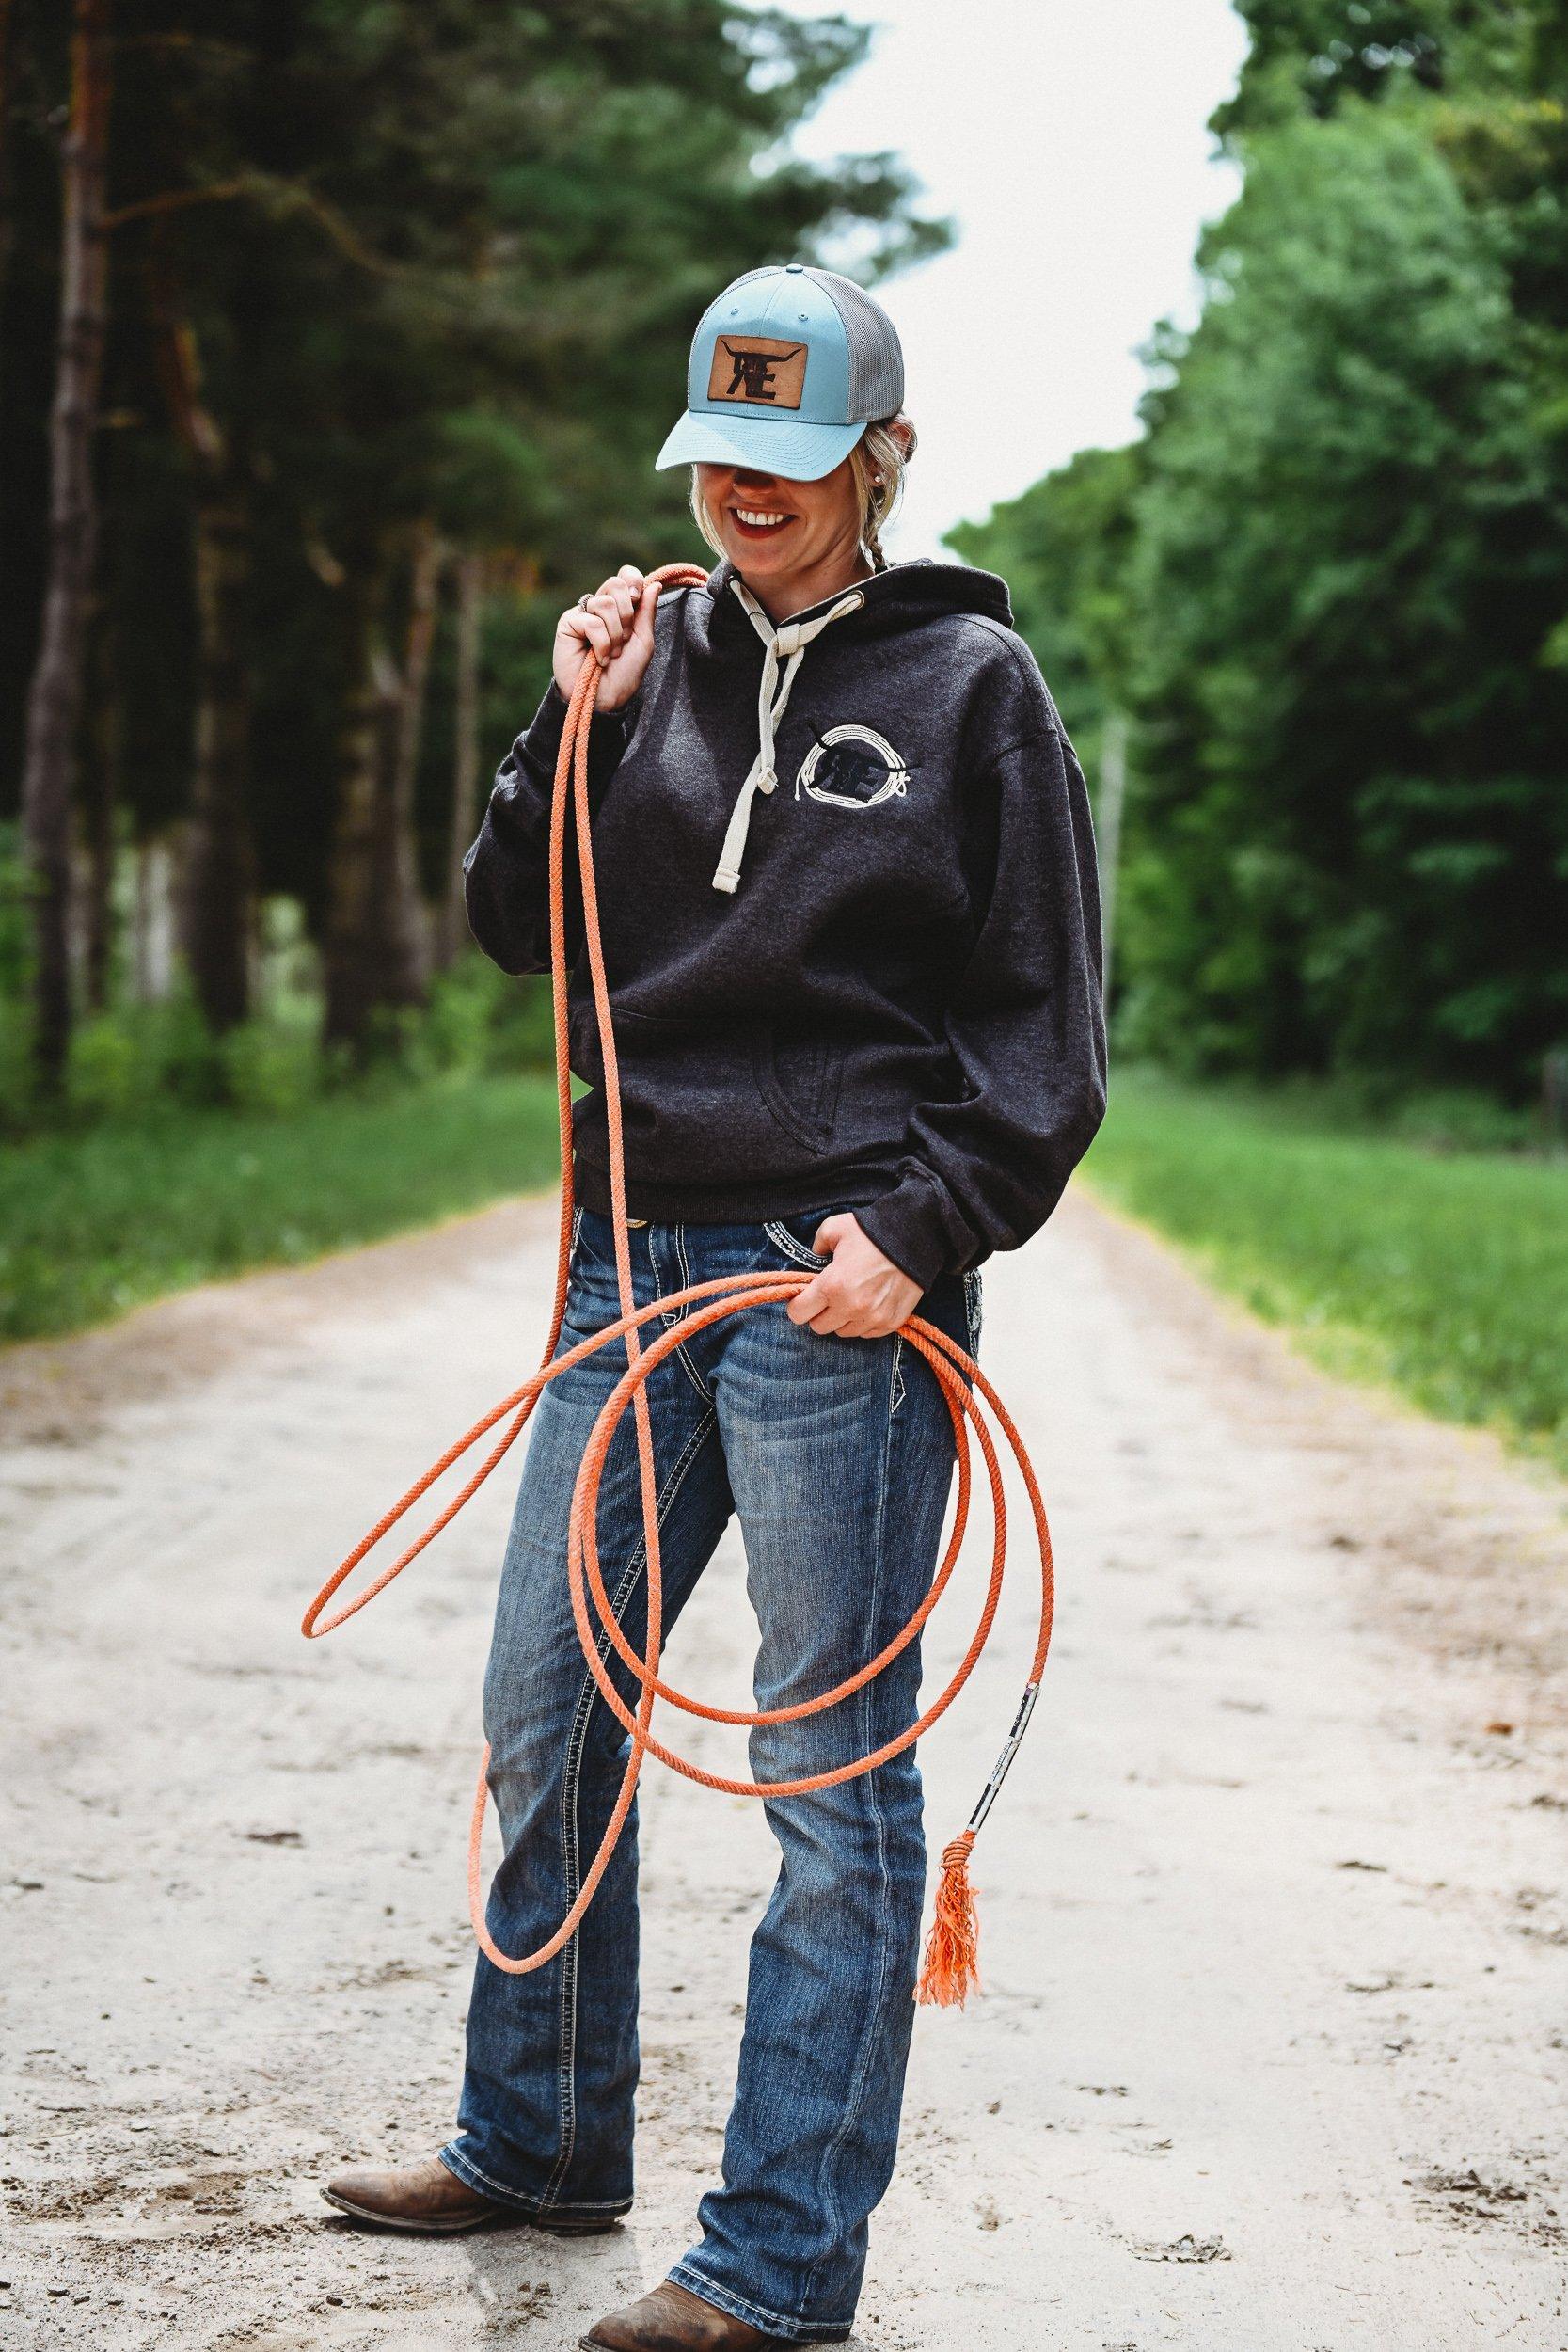 Ranchy Roper Pullover Hoodie - The Ranchy Equestrian